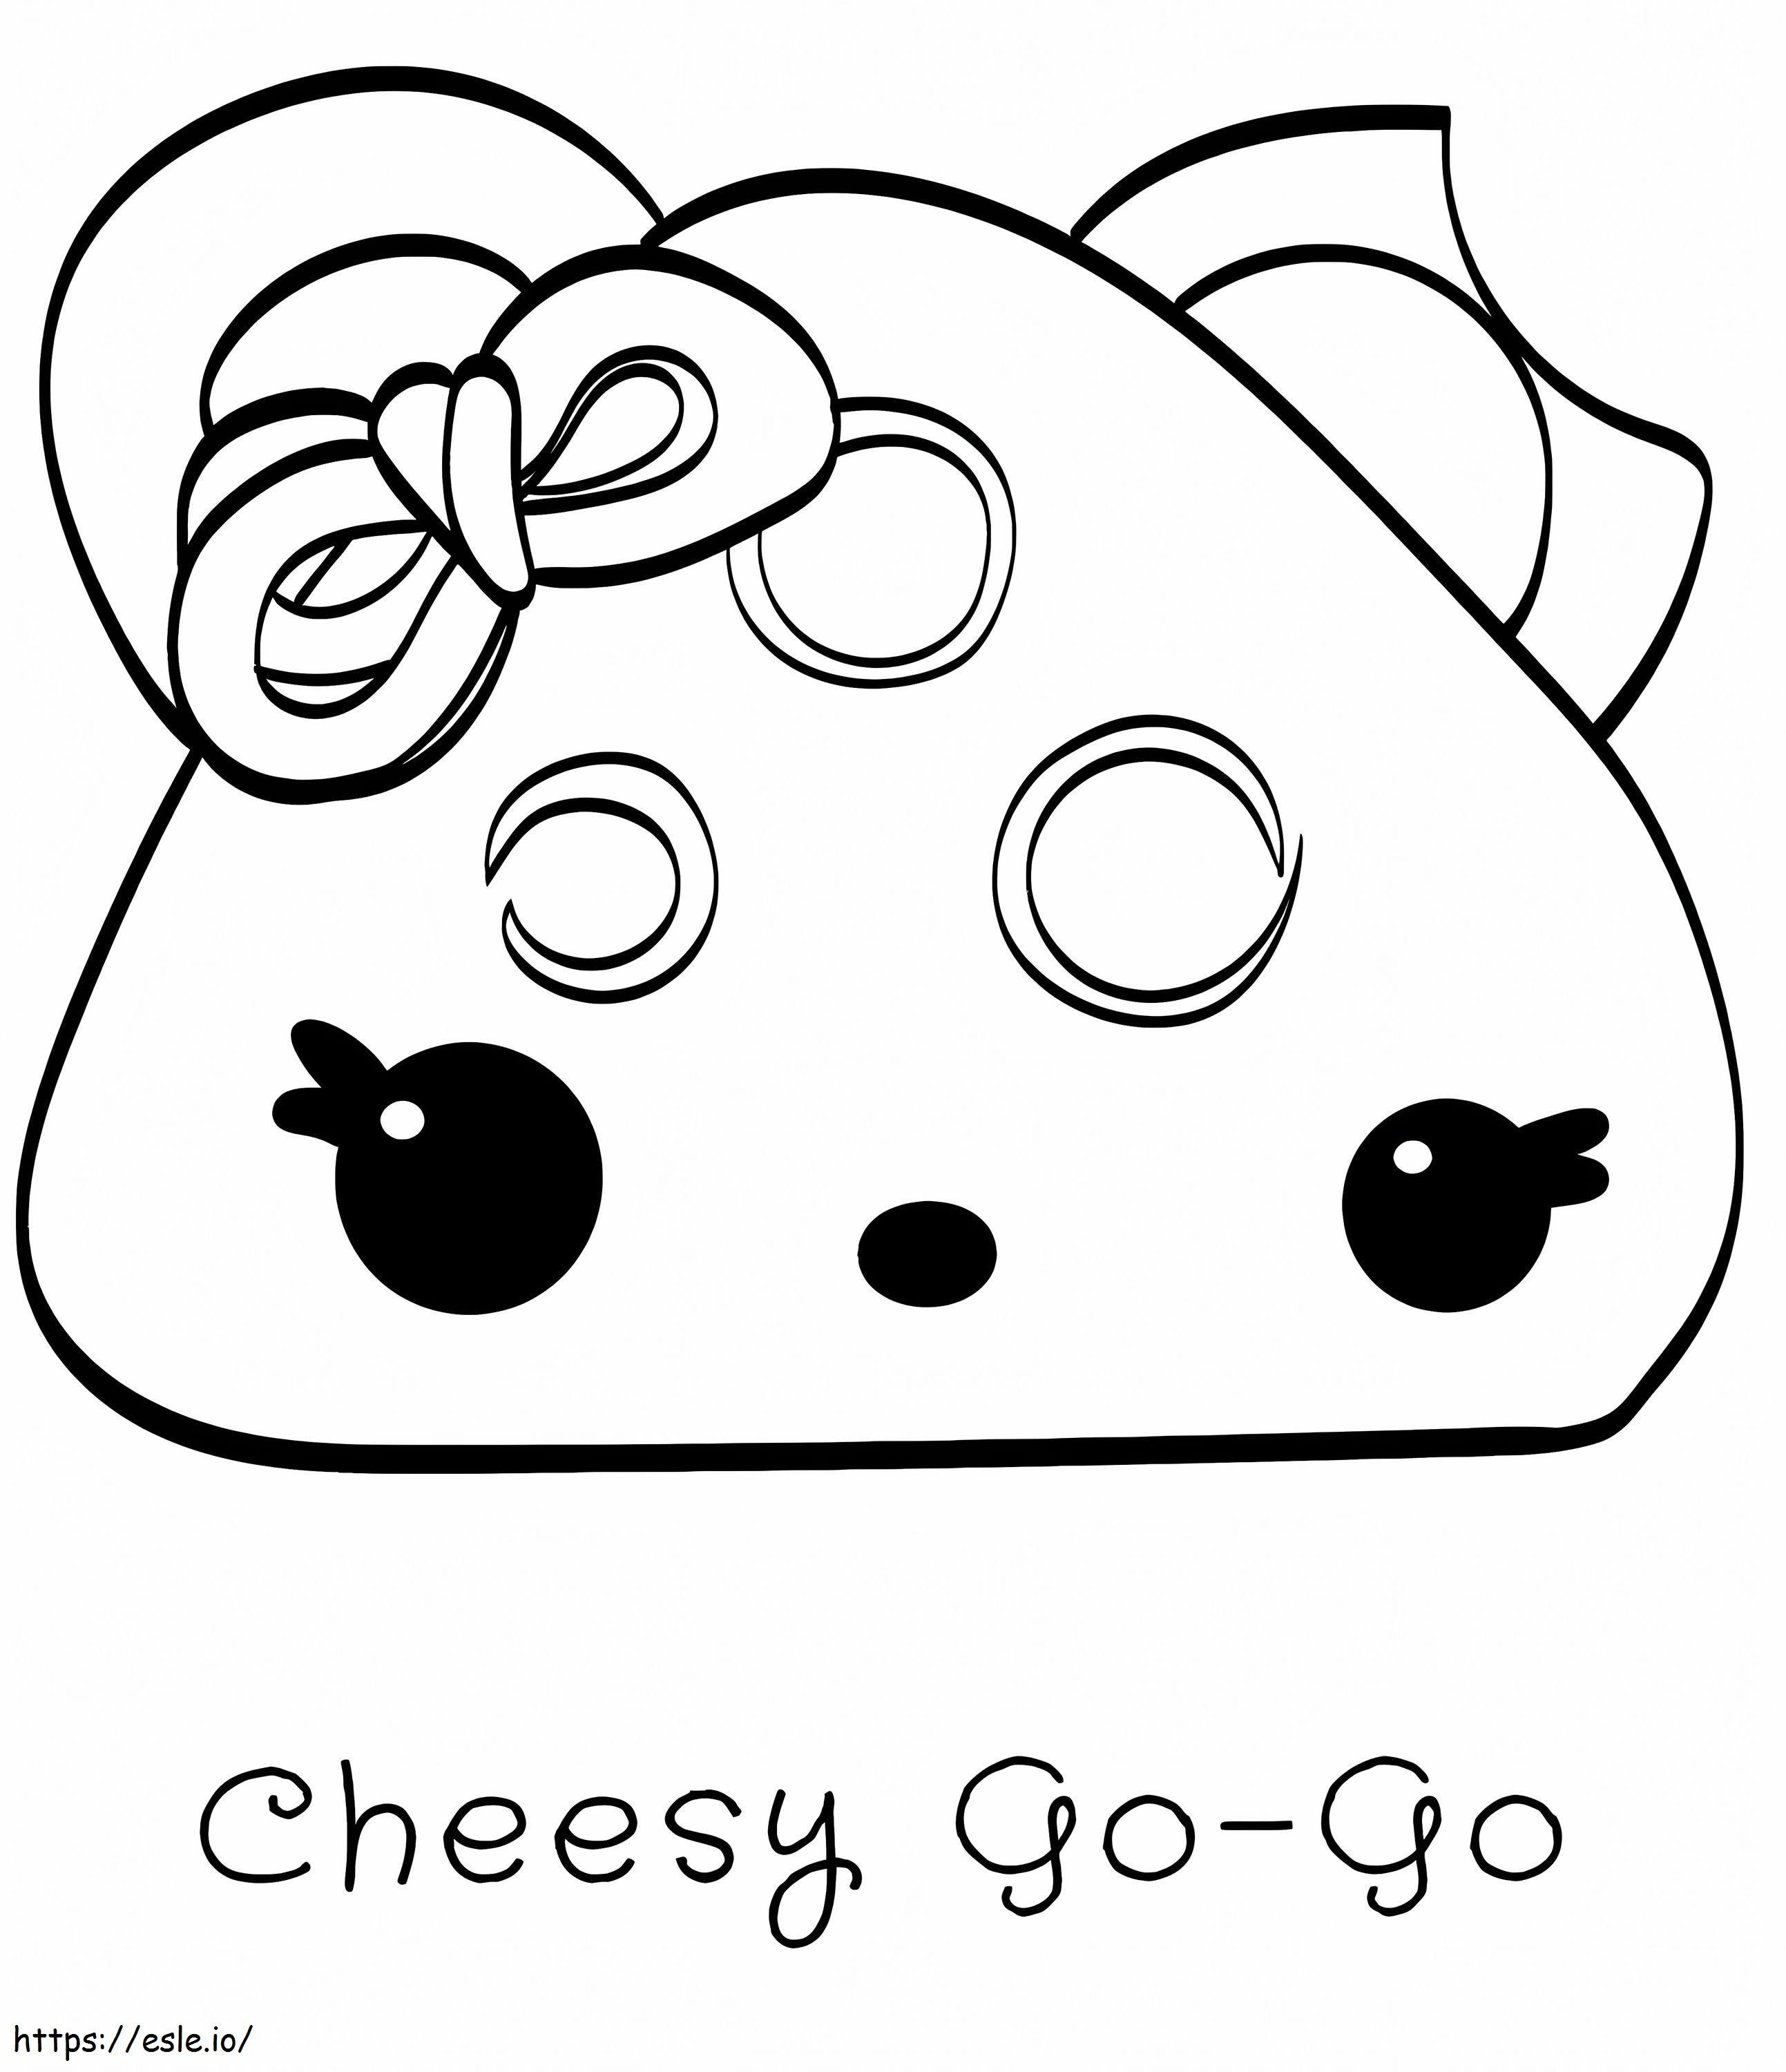 Chessy Go Go And Num Noms coloring page